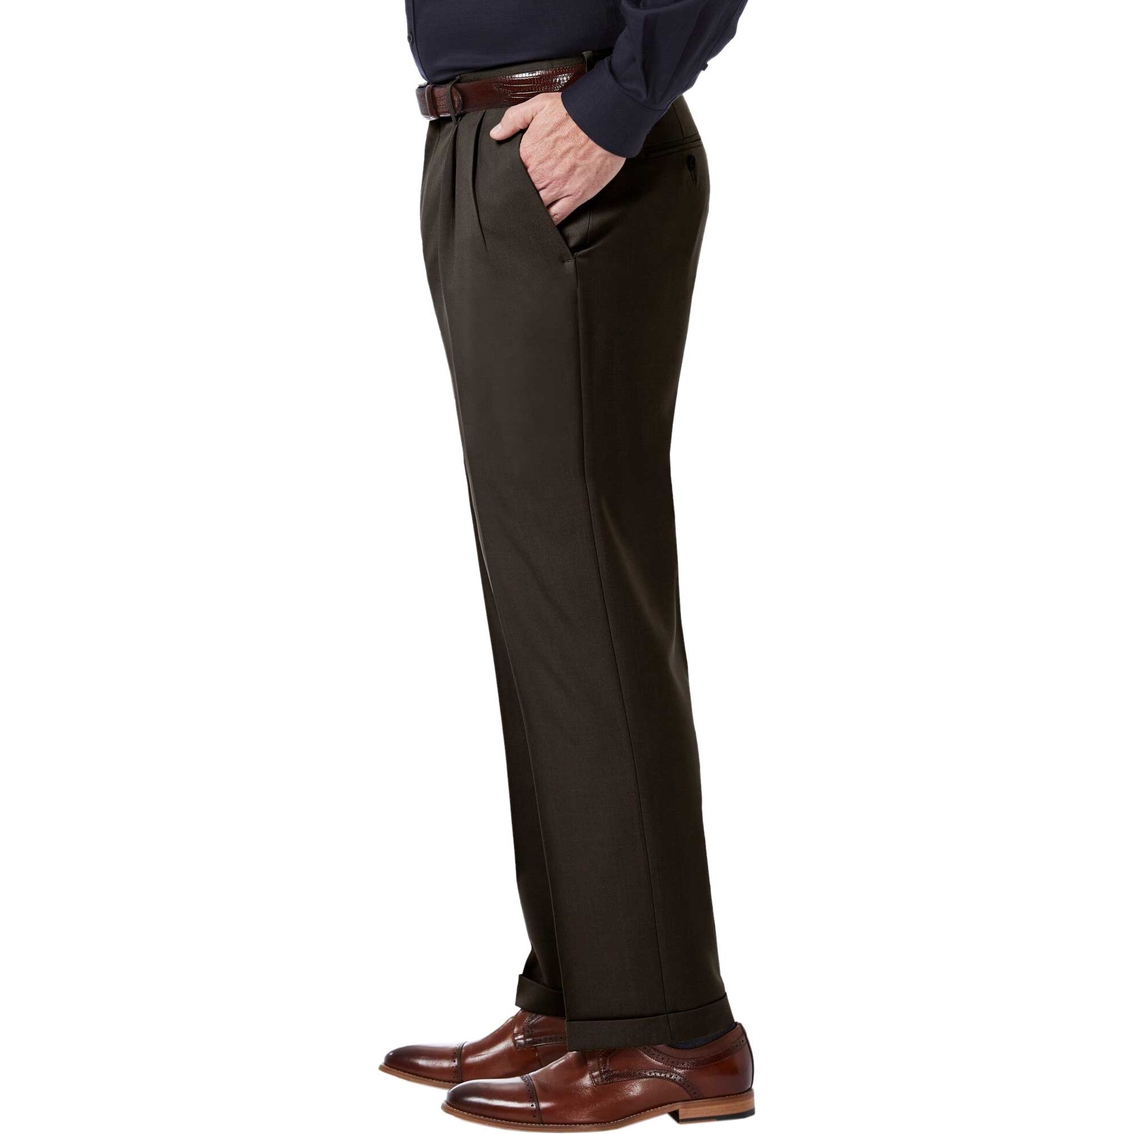 Haggar Premium Comfort 4 Way Stretch Classic Fit Pleat Front Pants - Image 3 of 5